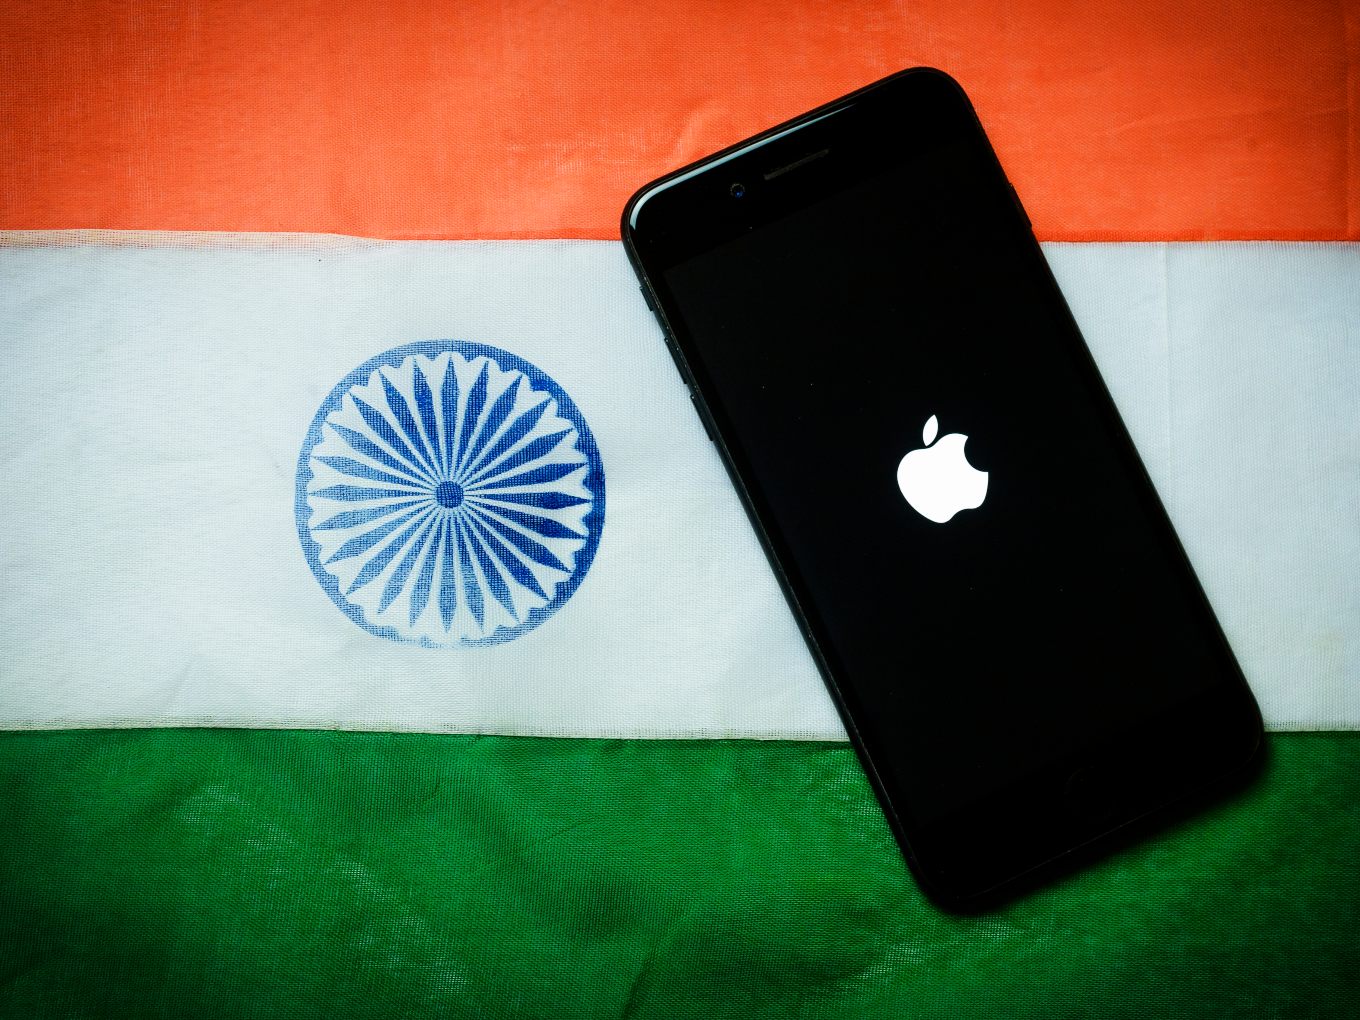 India To Benefit From $50 Mn Supply Chain Workers Upskilling By Apple